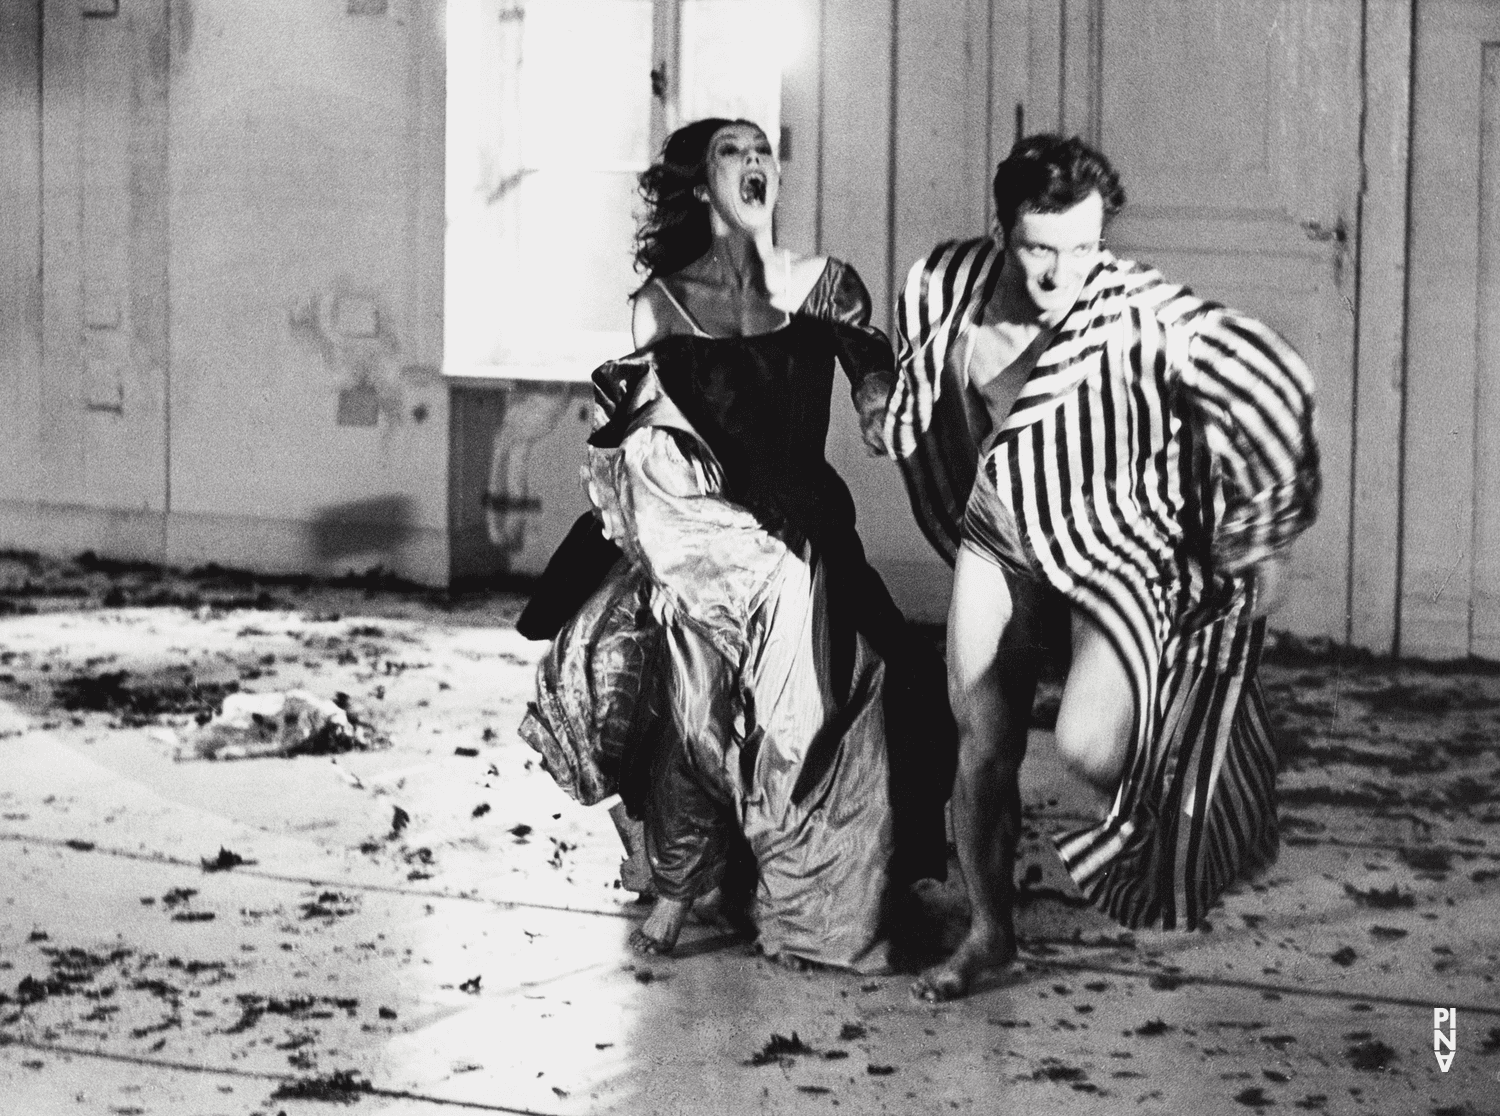 Jan Minařík and Marion Cito in “Bluebeard. While Listening to a Tape Recording of Béla Bartók's Opera "Duke Bluebeard's Castle"” by Pina Bausch